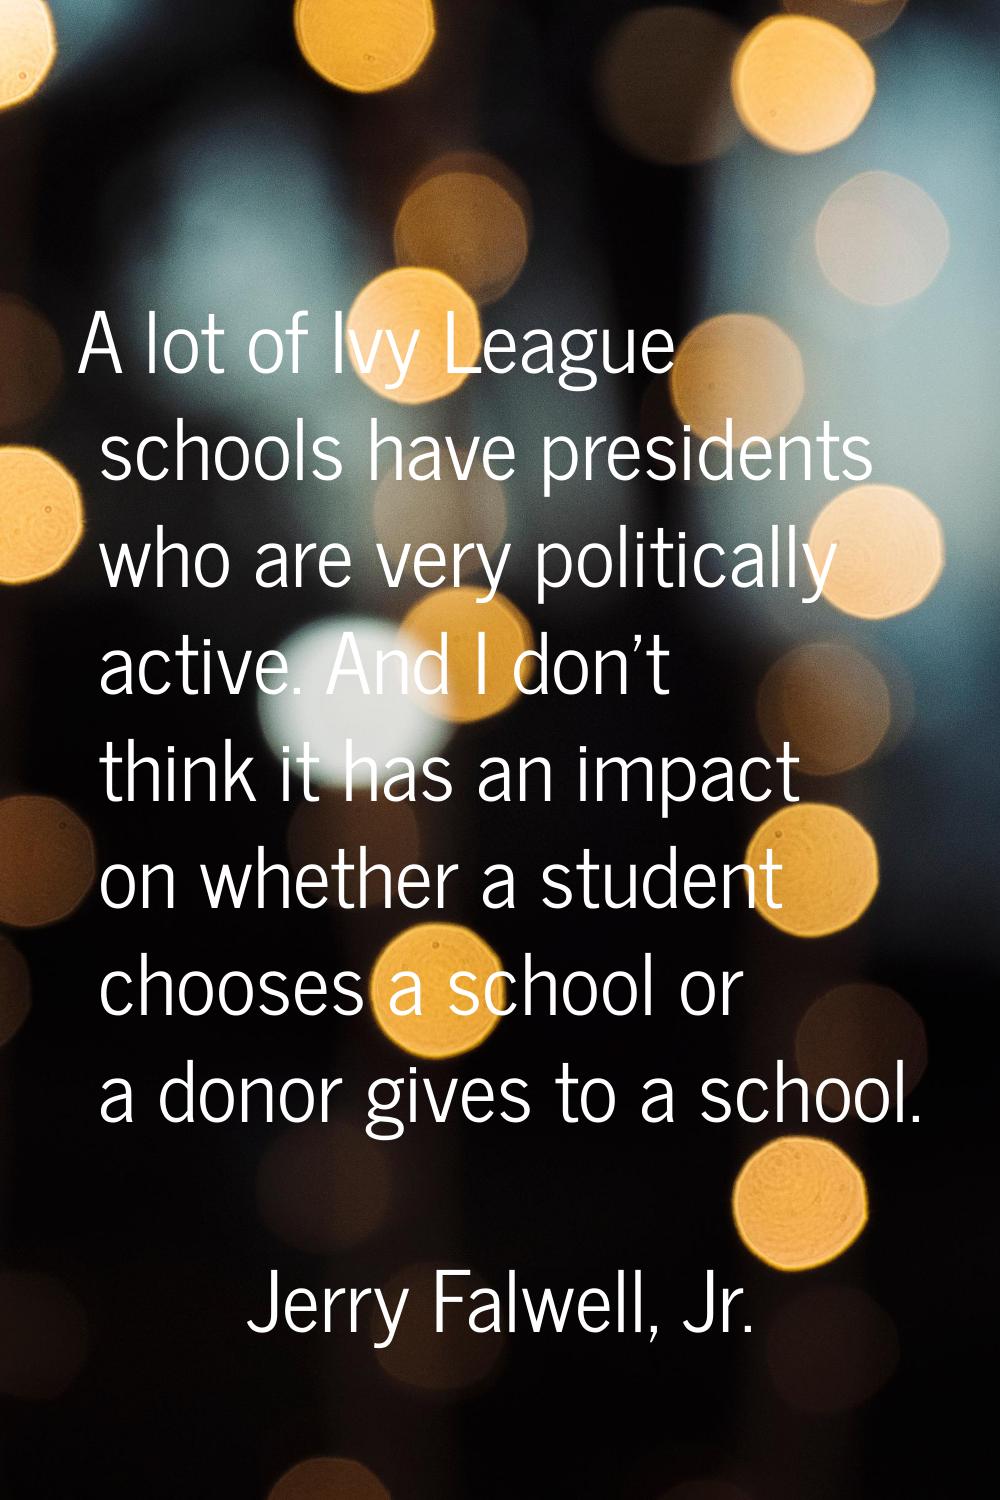 A lot of Ivy League schools have presidents who are very politically active. And I don't think it h